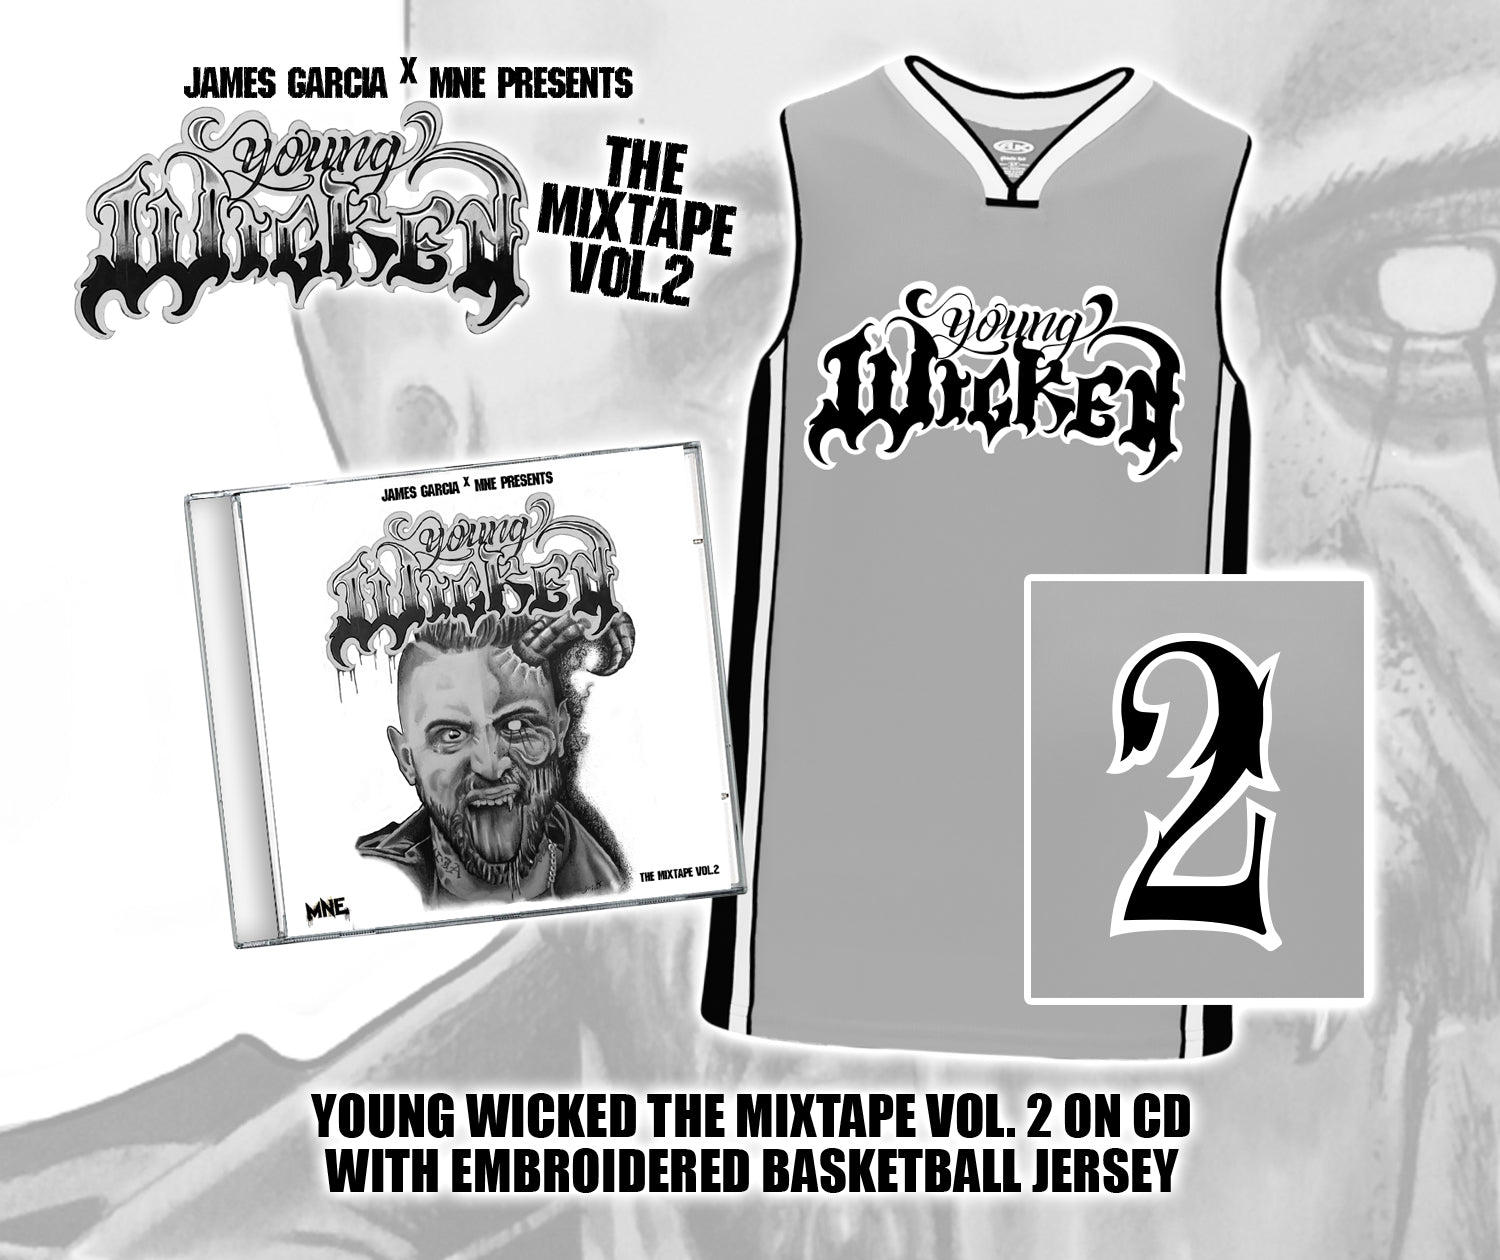 Image of "Young Wicked The Mixtape: Vol. 2" CD & Embroidered Jersey Bundle